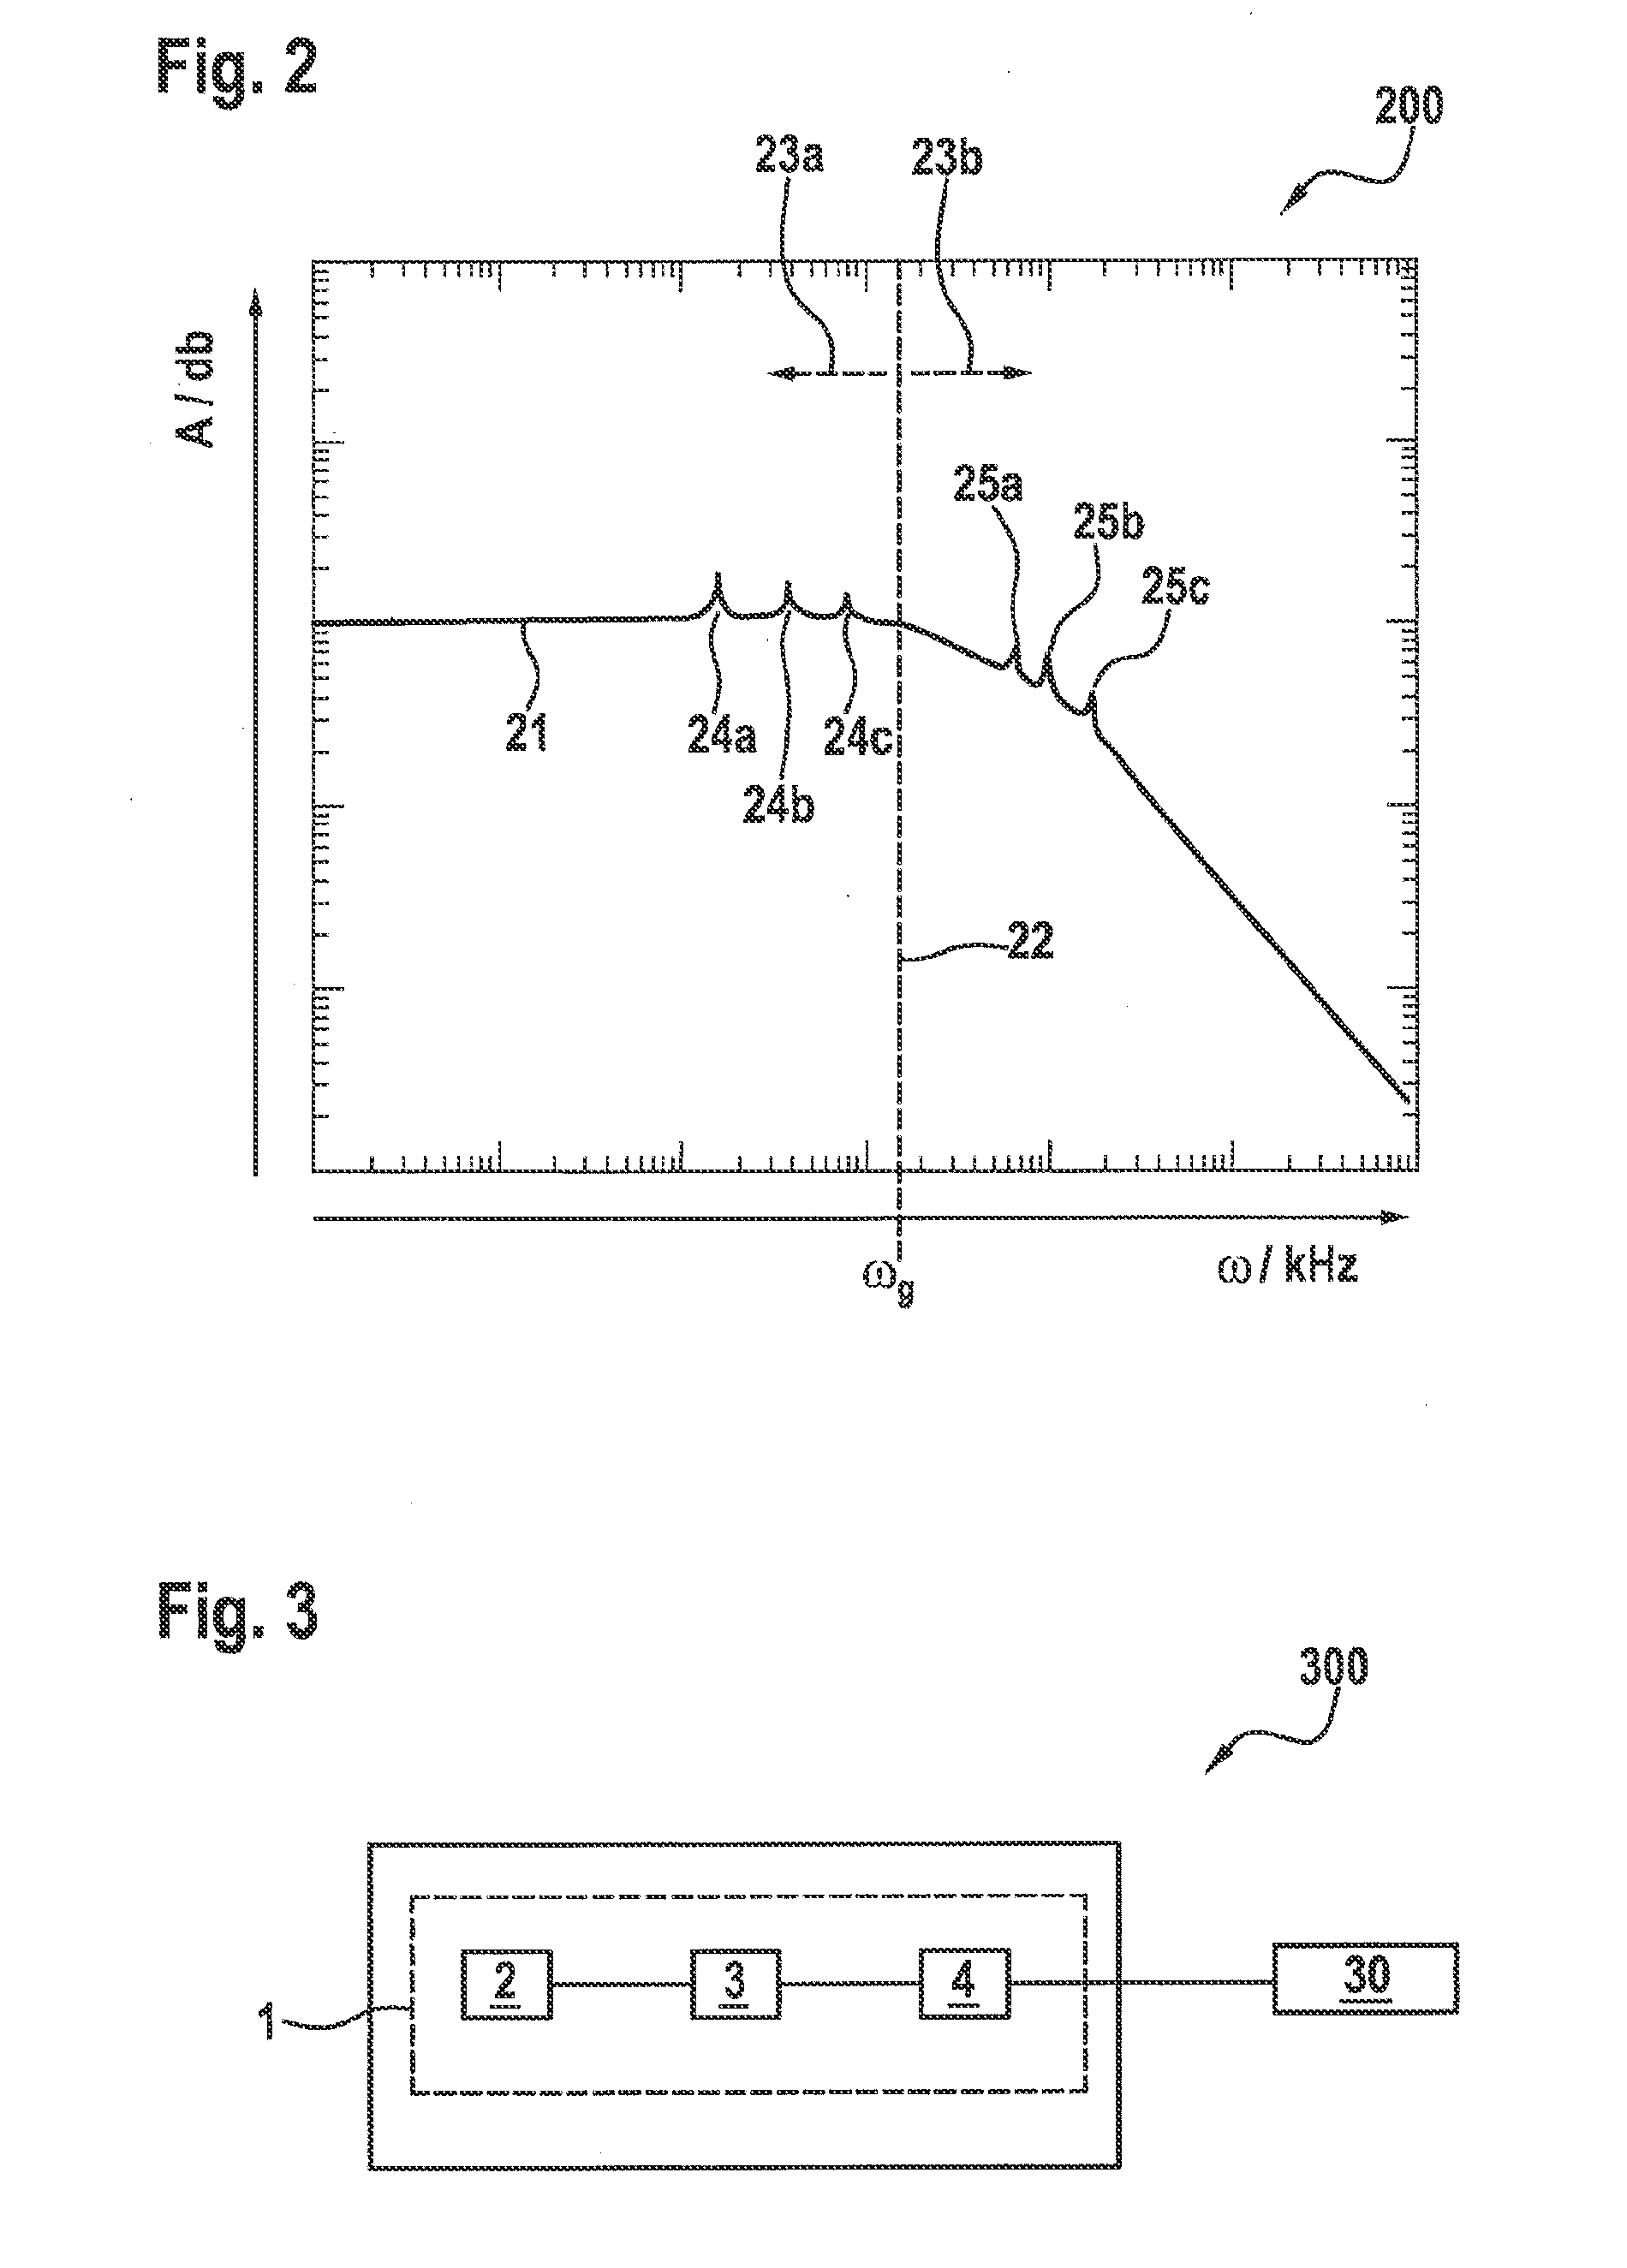 Digital control for a microelectromechanical element